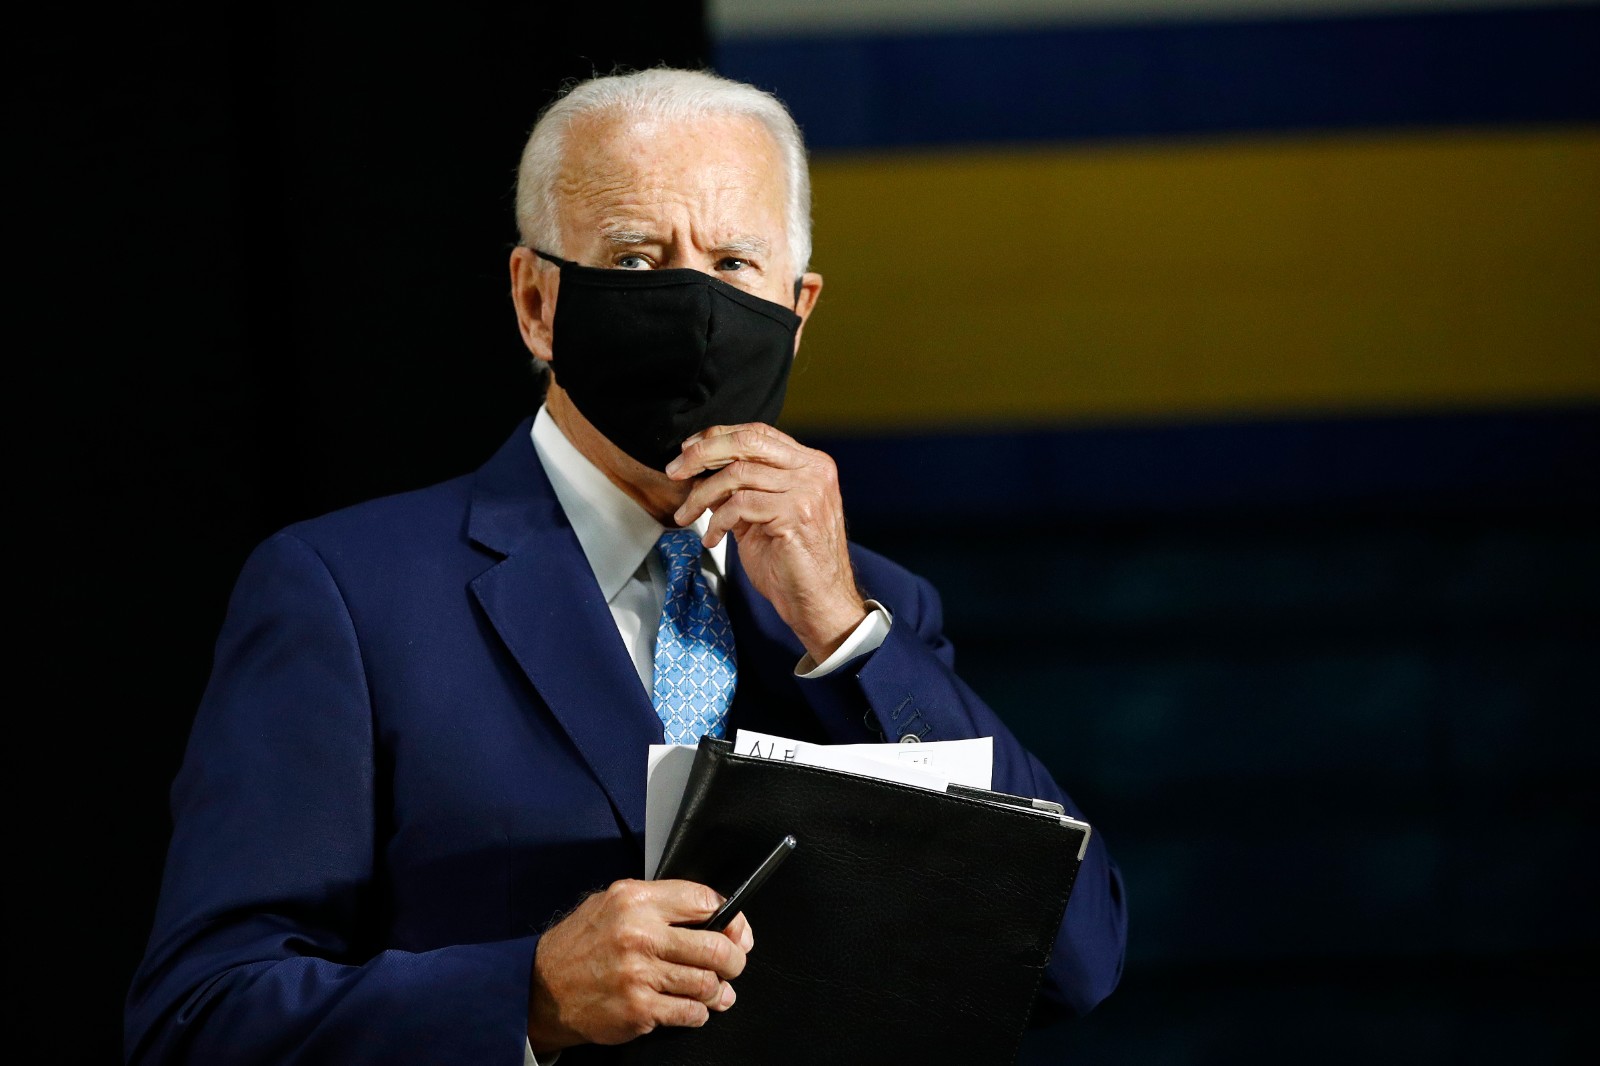 Democratic presidential candidate, former Vice President Joe Biden puts on a face mask to protect against the spread of the new coronavirus as he departs after speaking at Alexis Dupont High School in Wilmington, Del., Tuesday, June 30, 2020. (AP Photo/Patrick Semansky)